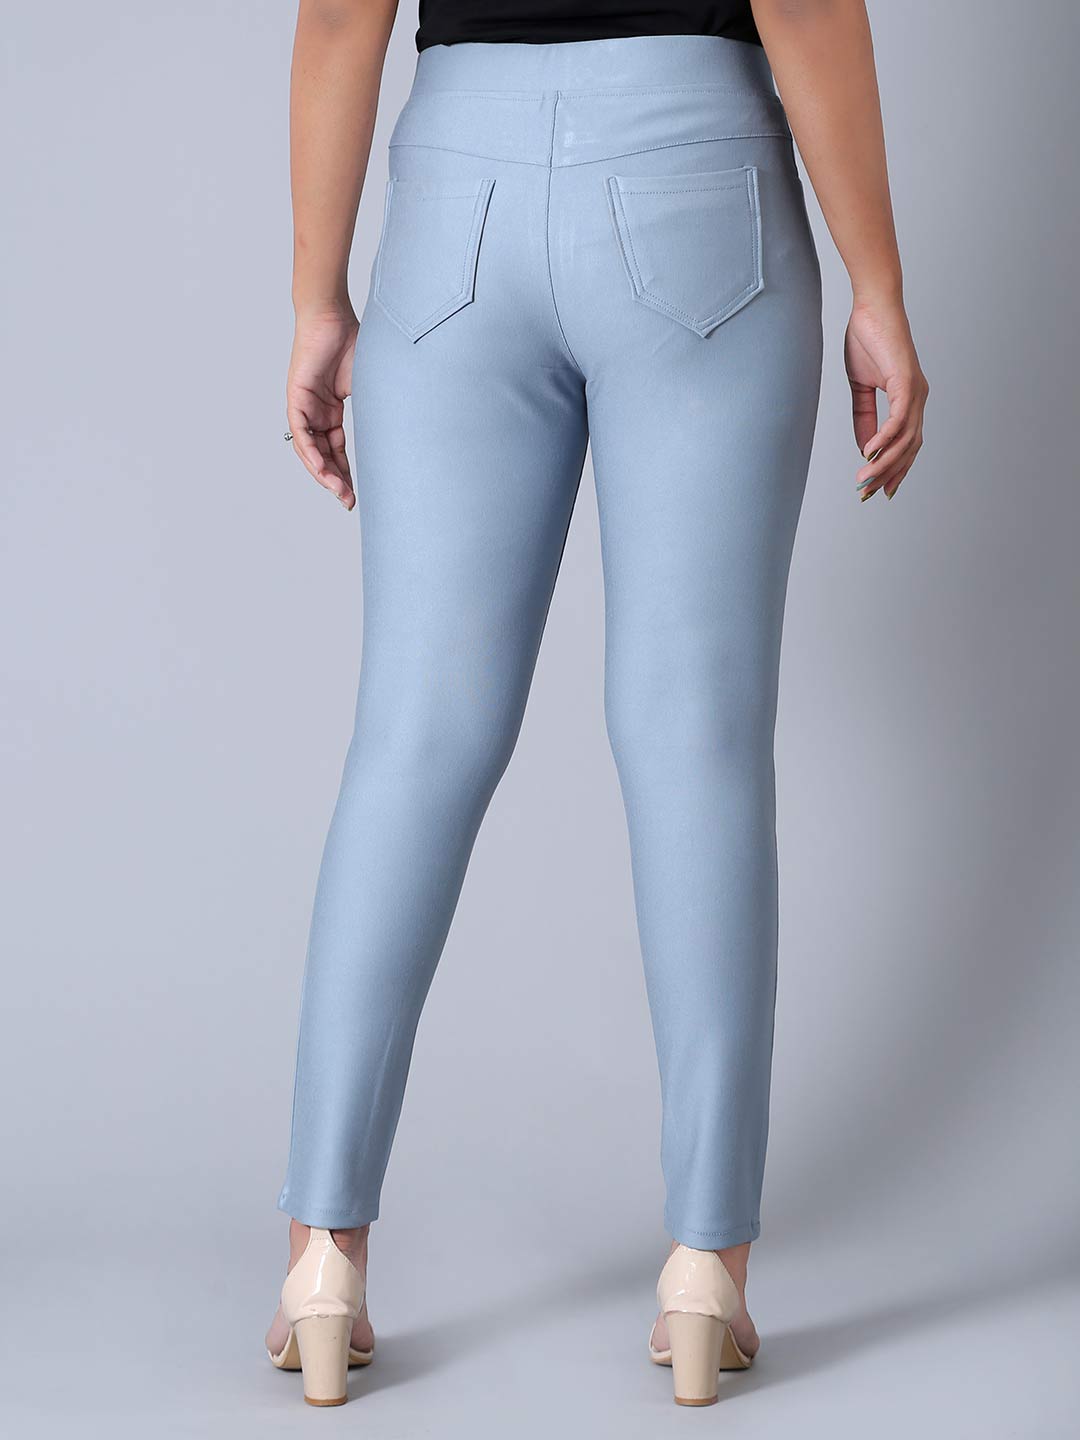 https://1099554485.rsc.cdn77.org/upload/products/blue_solid_cotton_jeggings_1613480597aw31794_3.jpg?imgeng=w_90